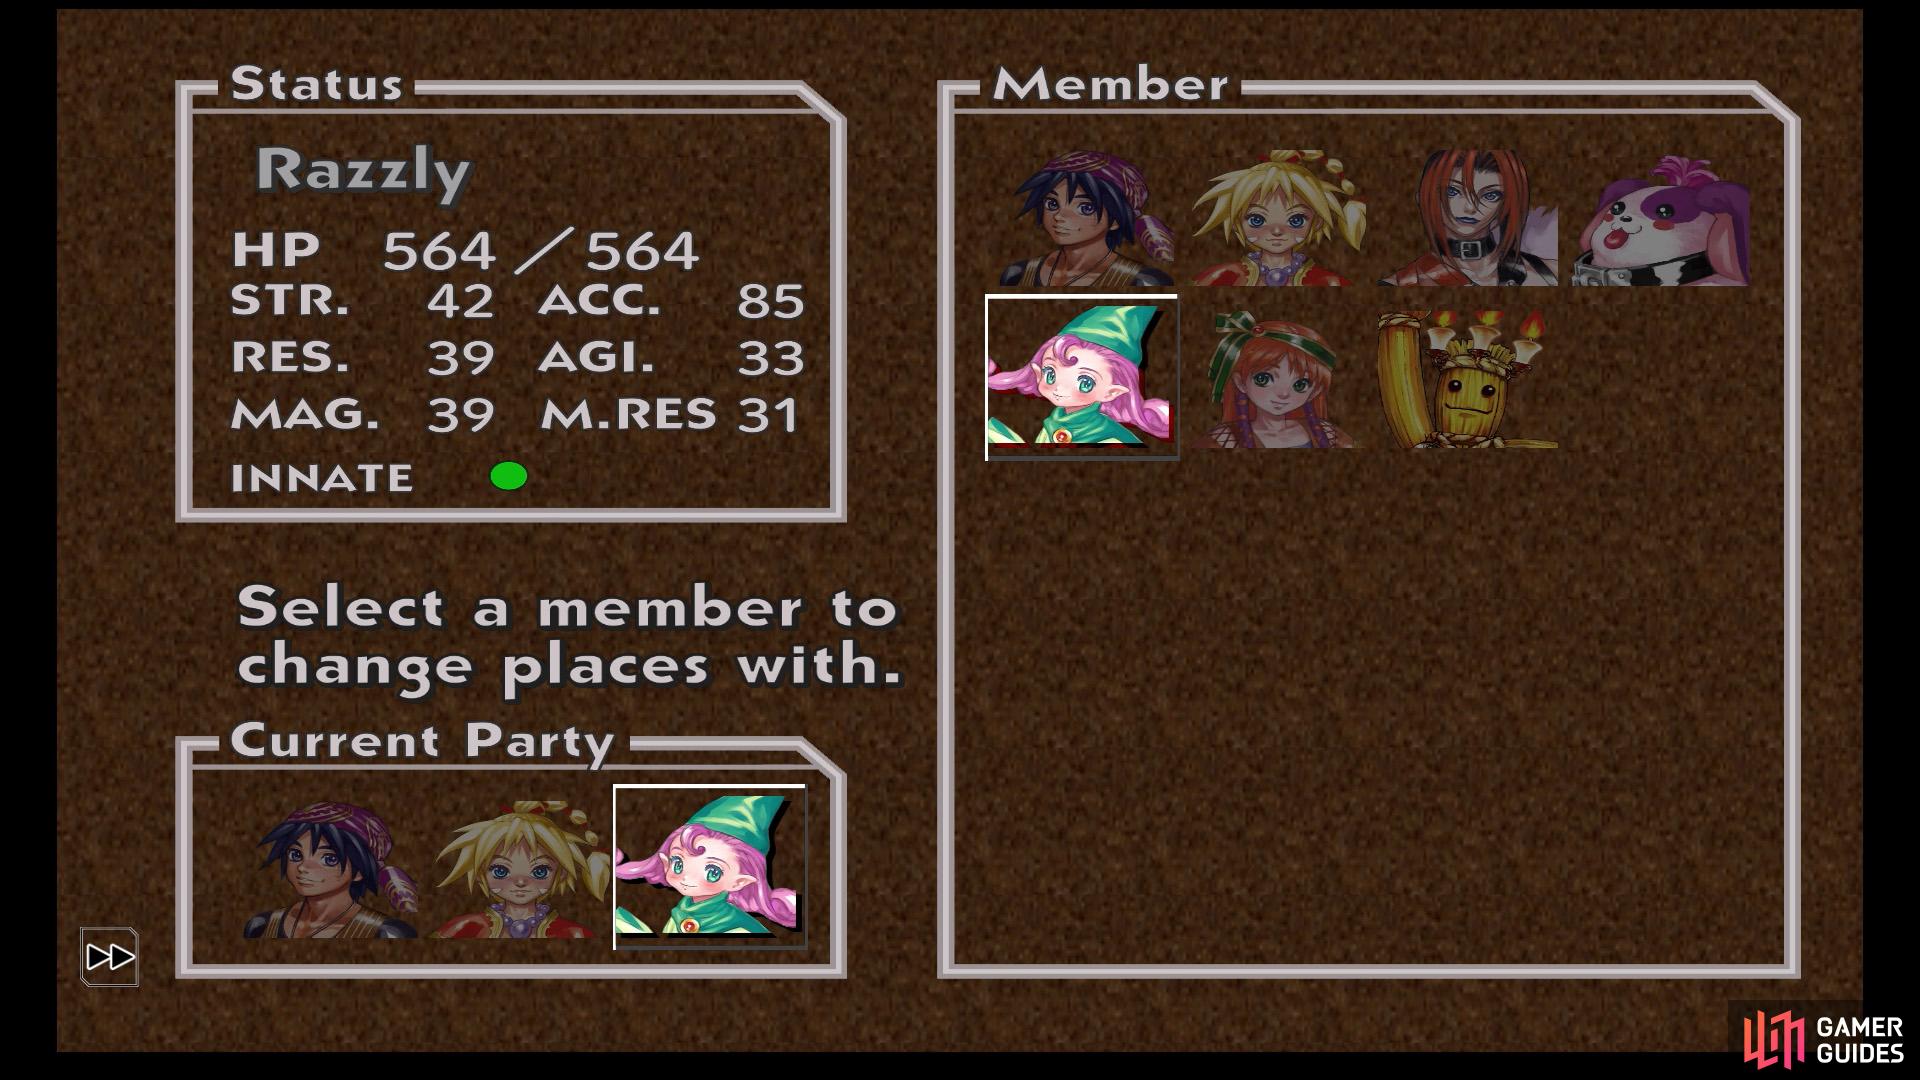 For this ending, you need Nikki and Razzly recruited at the same time.